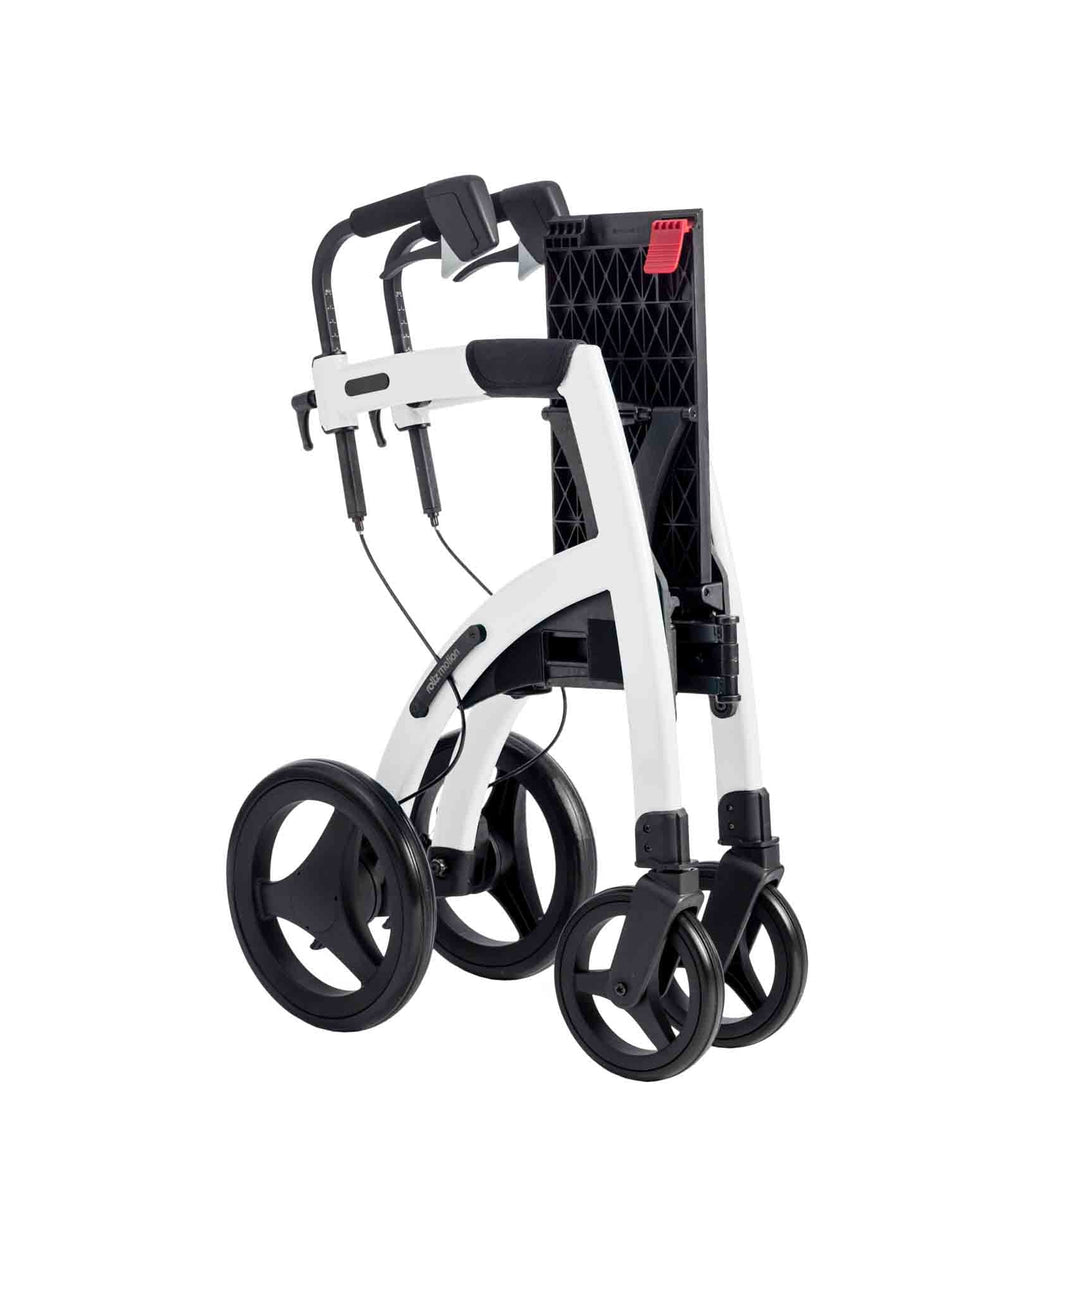 A white 'Rollz Motion' walking frame folded, on a white background